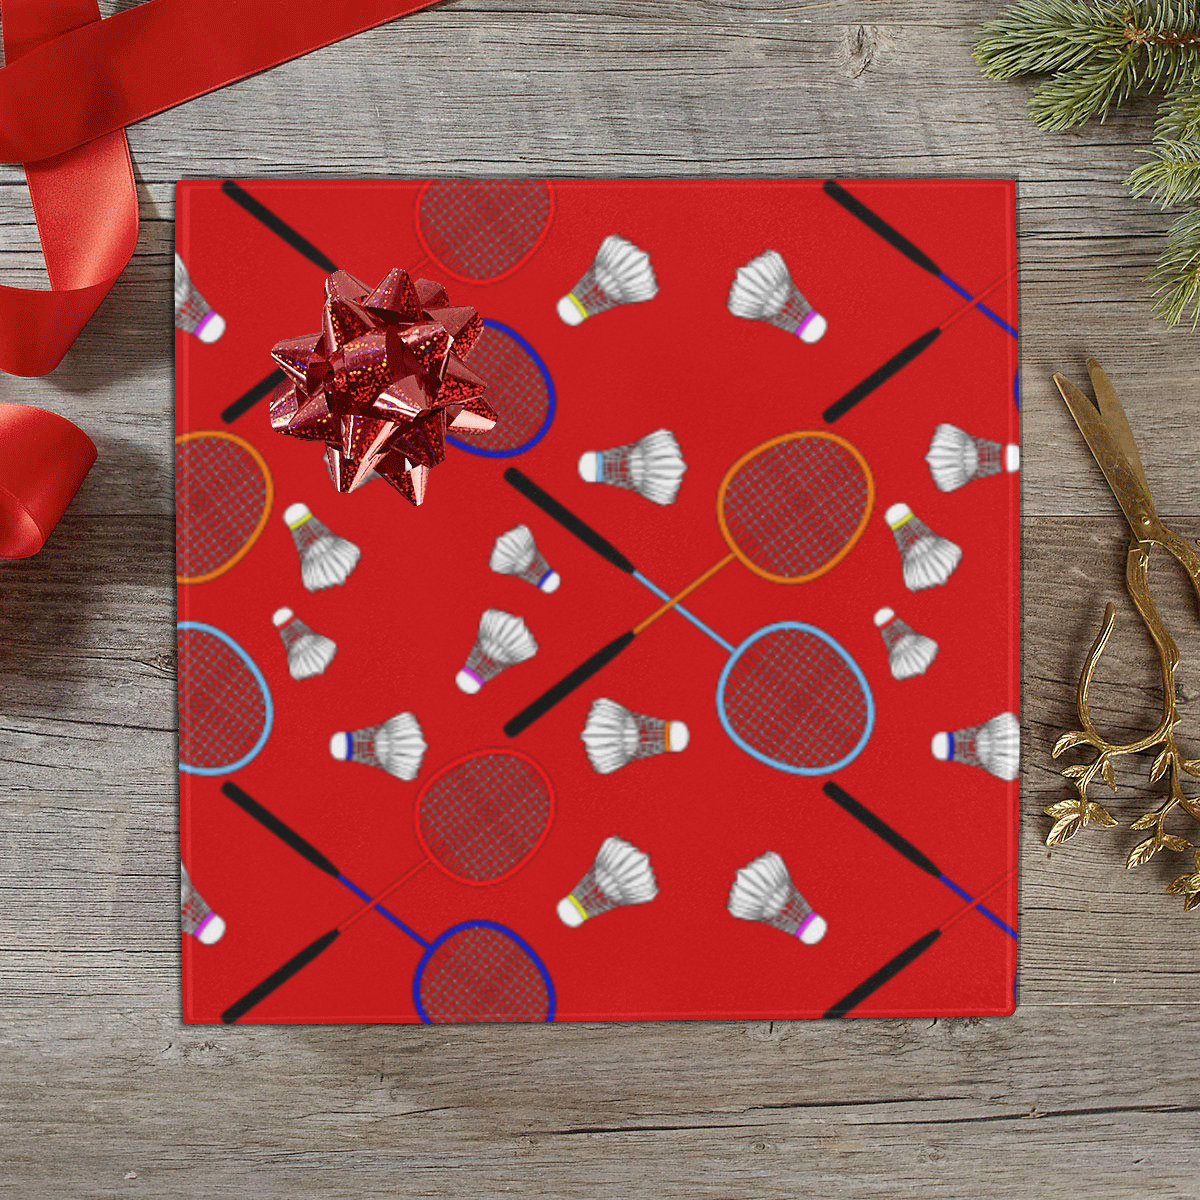 Badminton Rackets and Shuttlecocks Pattern Sports Red Gift Wrapping Paper 58"x 23" (1 Roll)